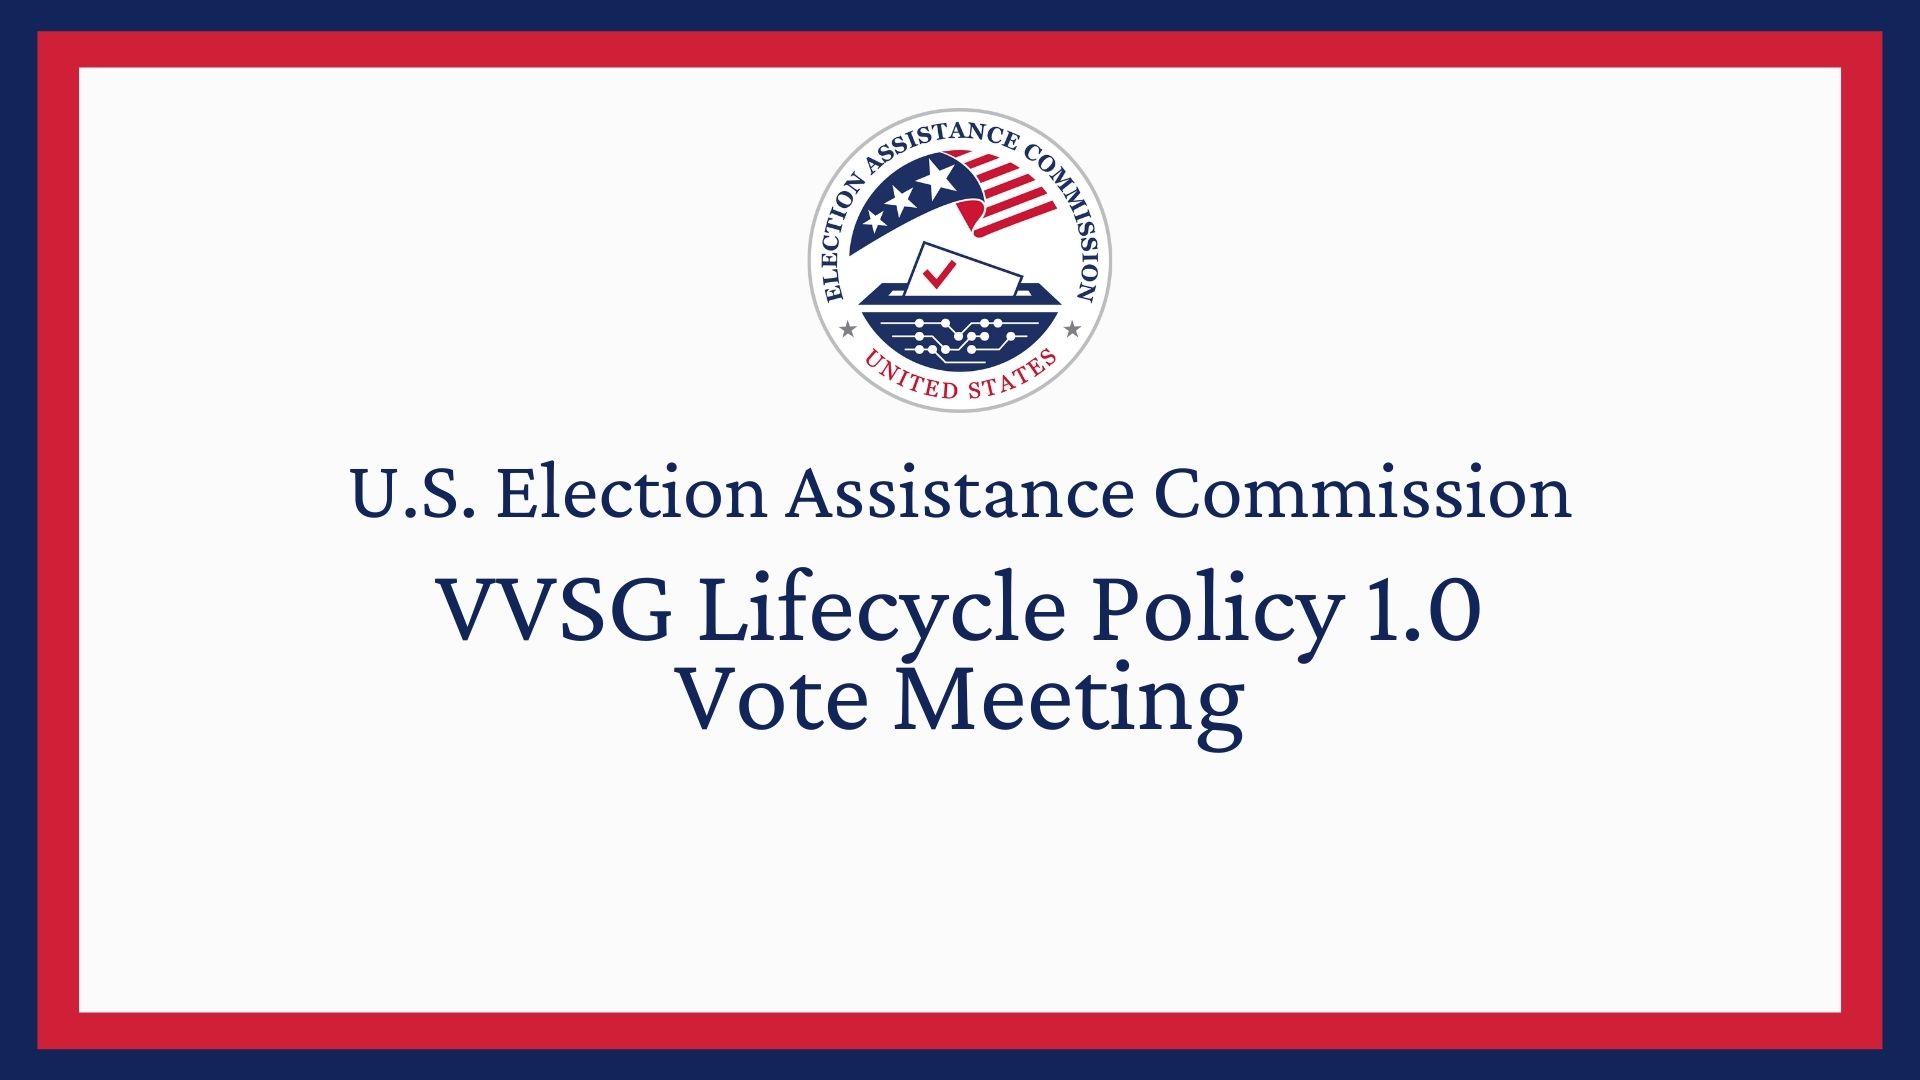 U.S. EAC Seal with the text " U.S. Election Assistance Commission, VVSG Lifecycle Policy 1.0 Vote Meeting"